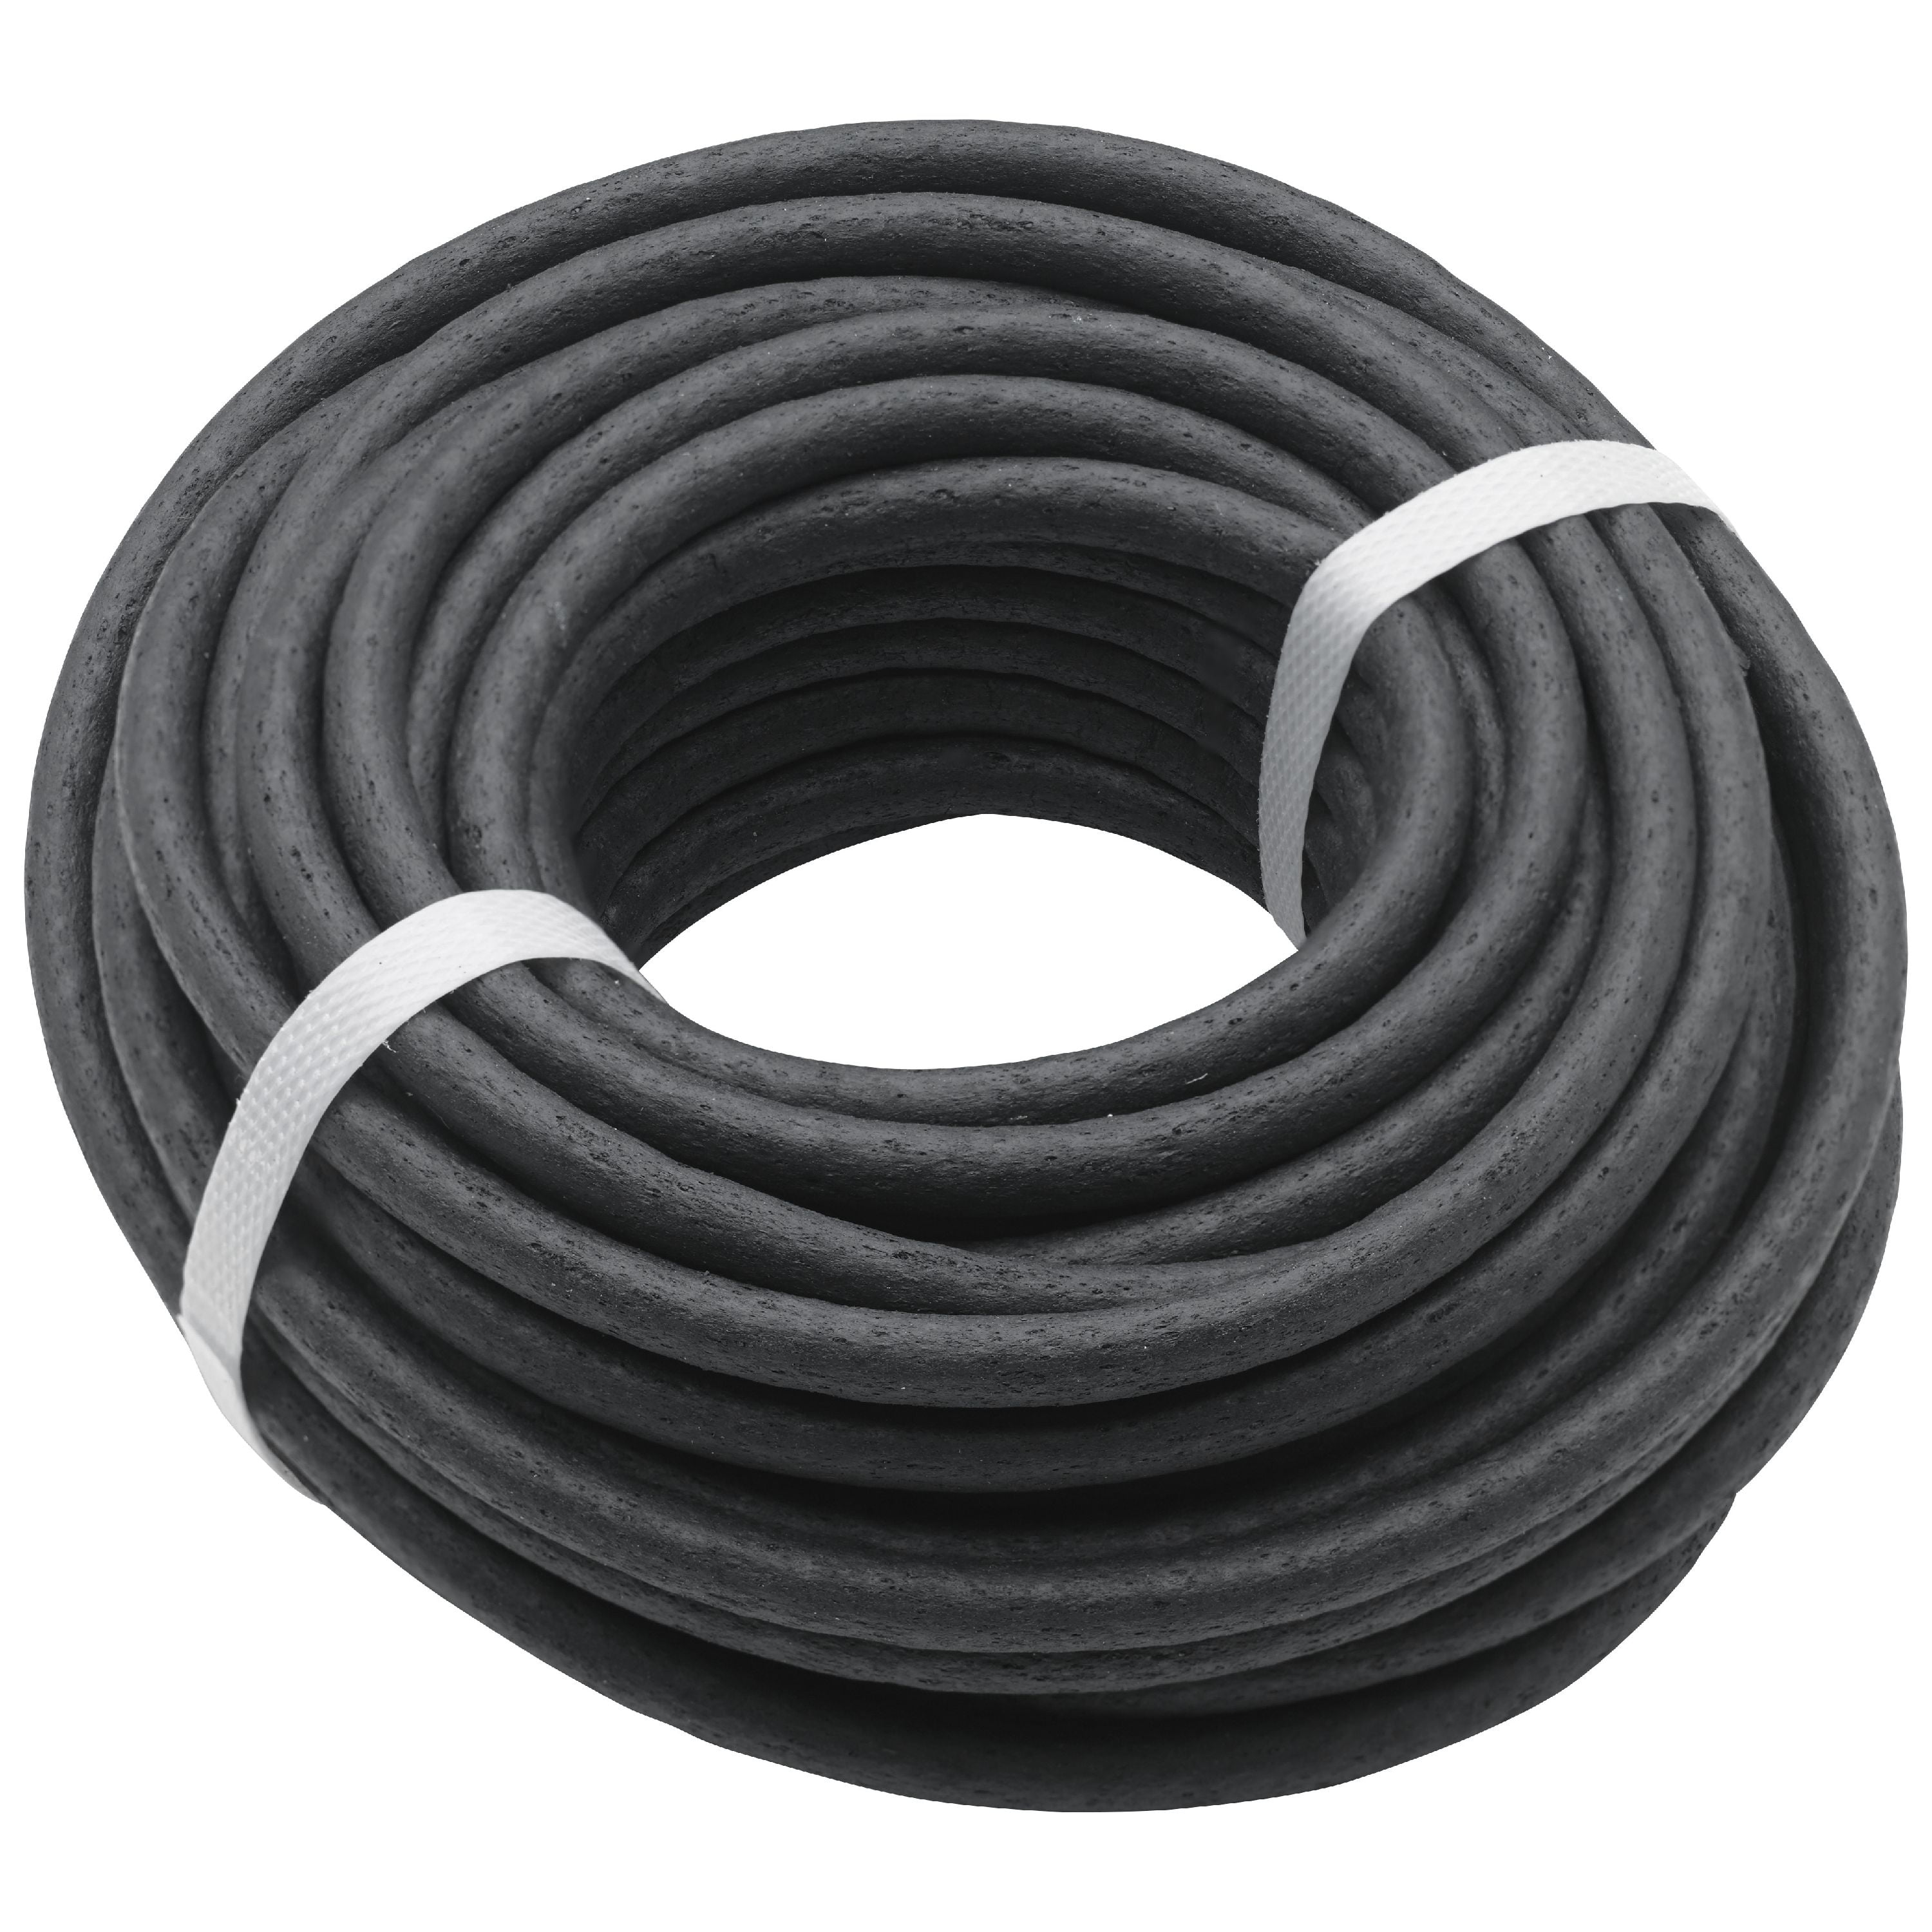 LANDSCAPE GRADE THICK WALLED POROUS PIPE/DRIP LINE/LEAKY HOSE/SOAKER HOSE,1/2" 